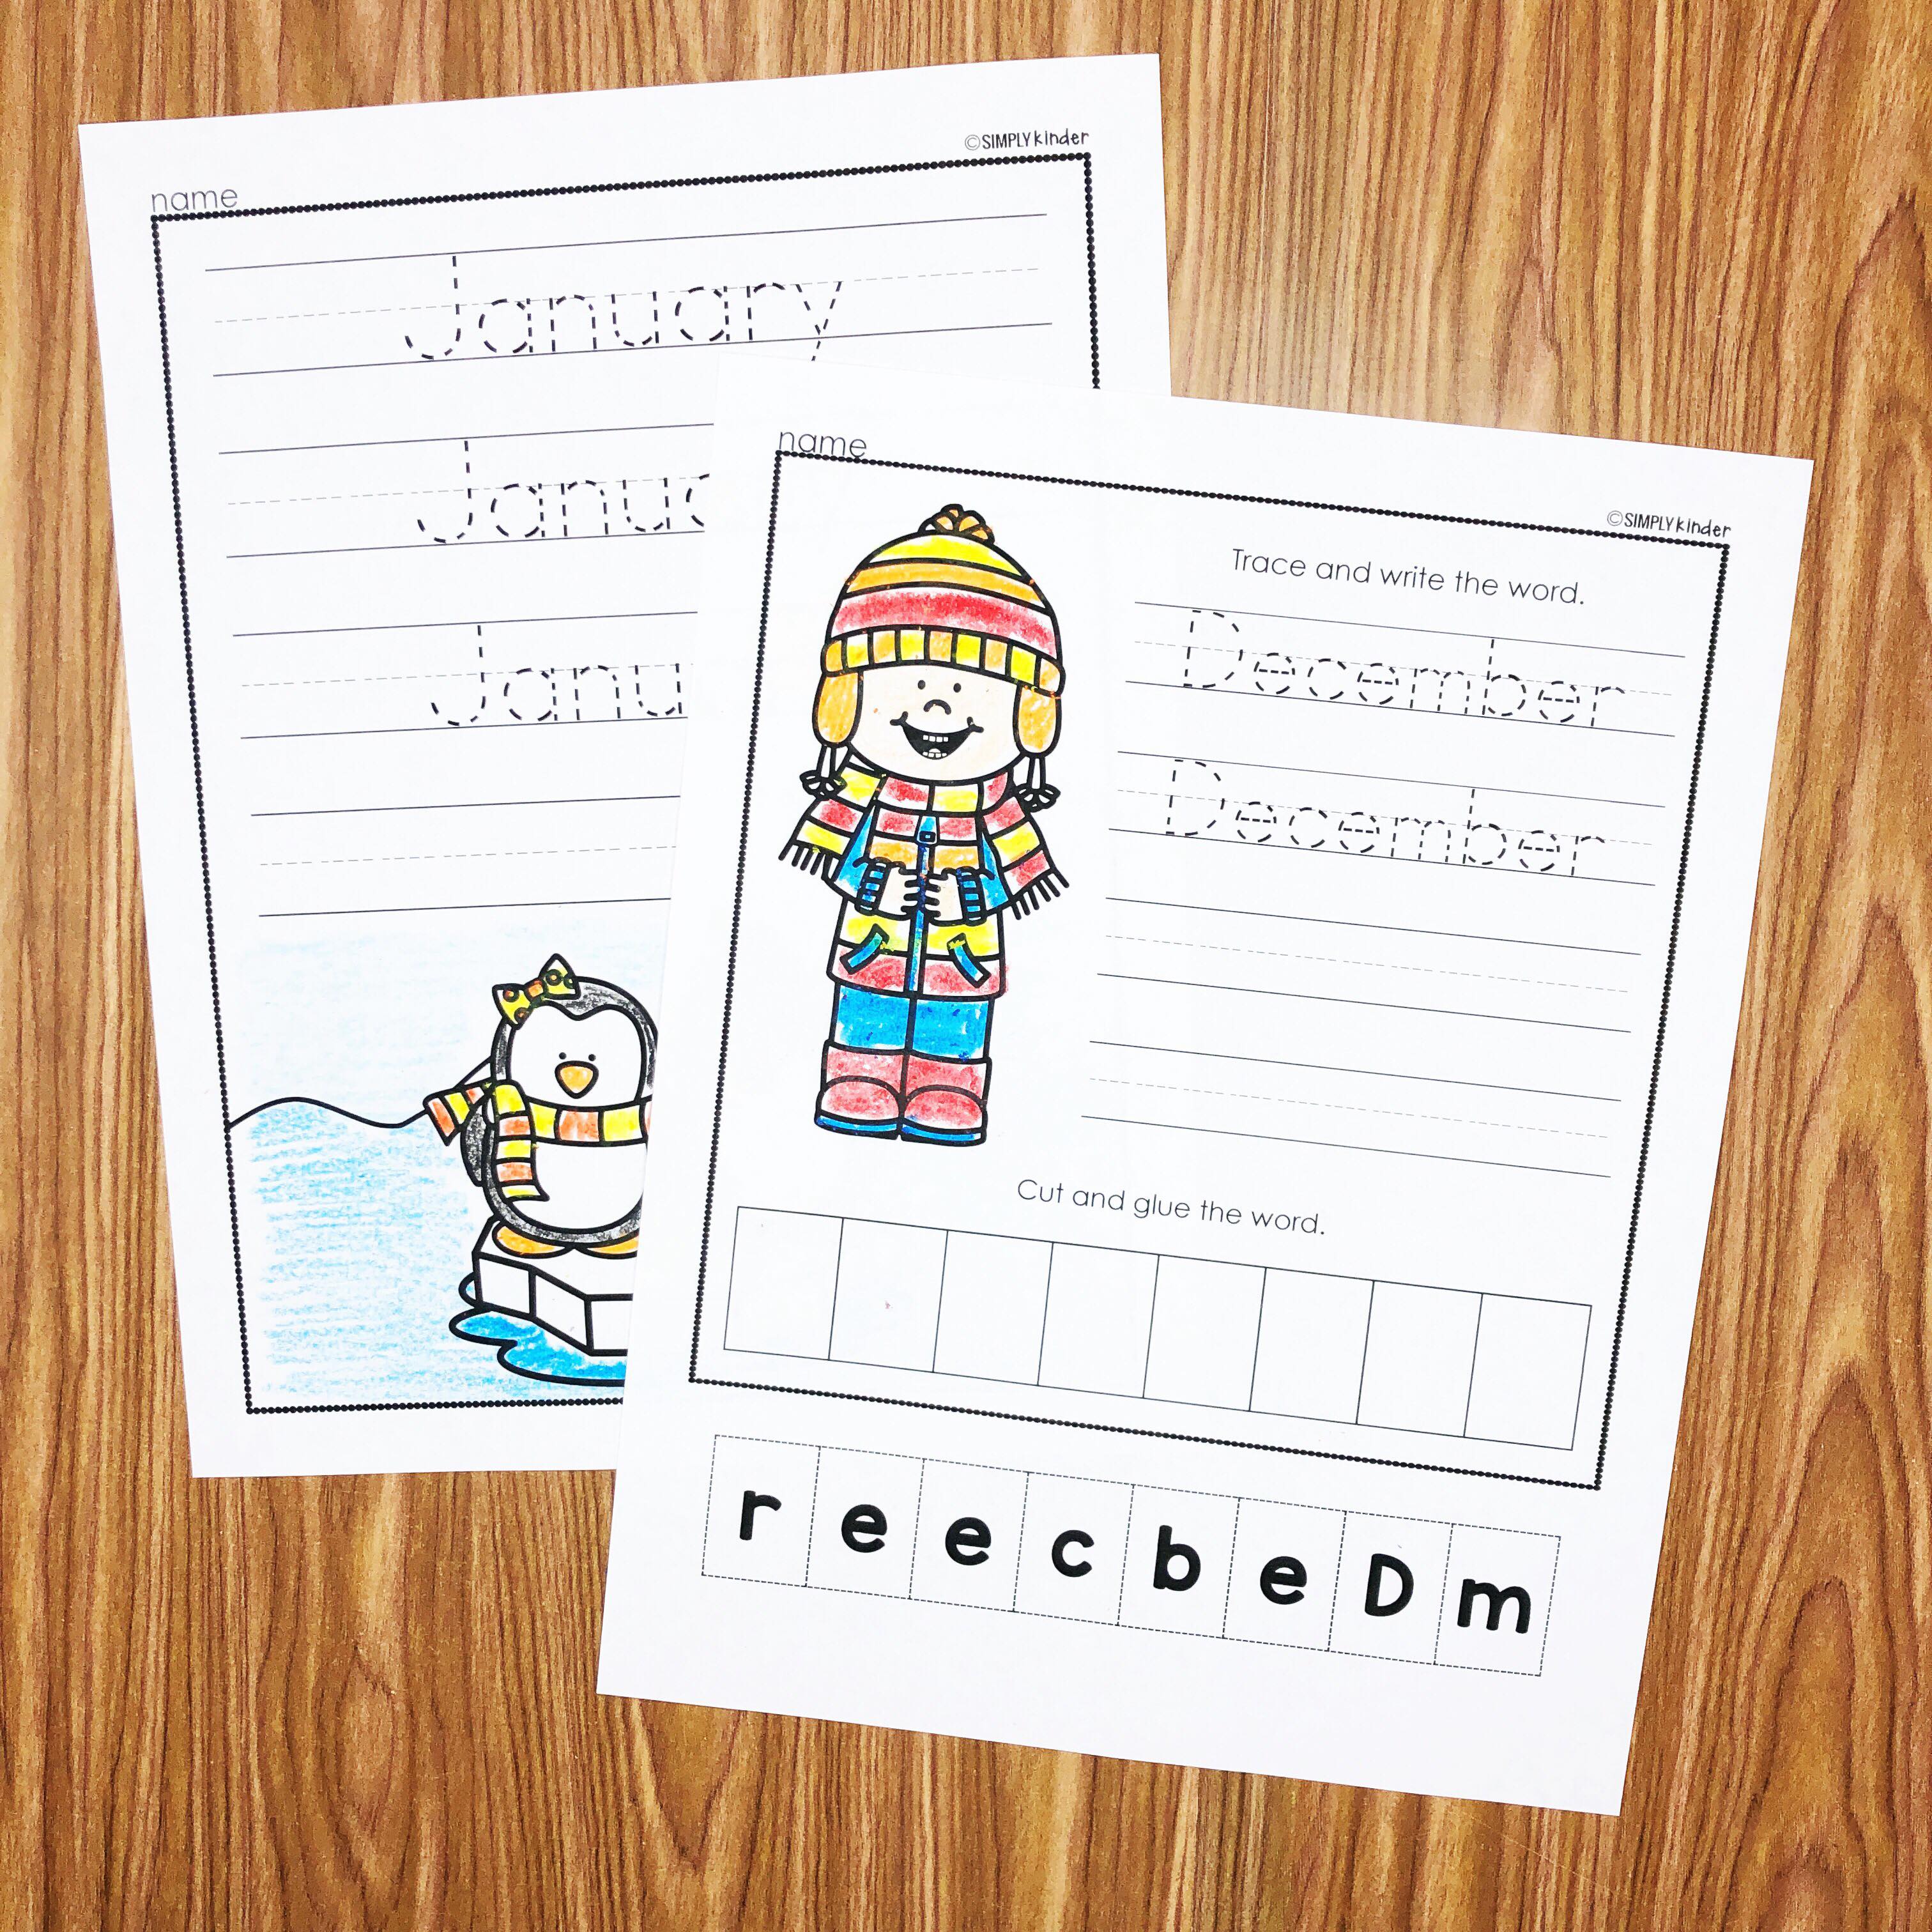 Learn to write the months printables from Simply Kinder.  Teacher your students how to write the months of the year.  